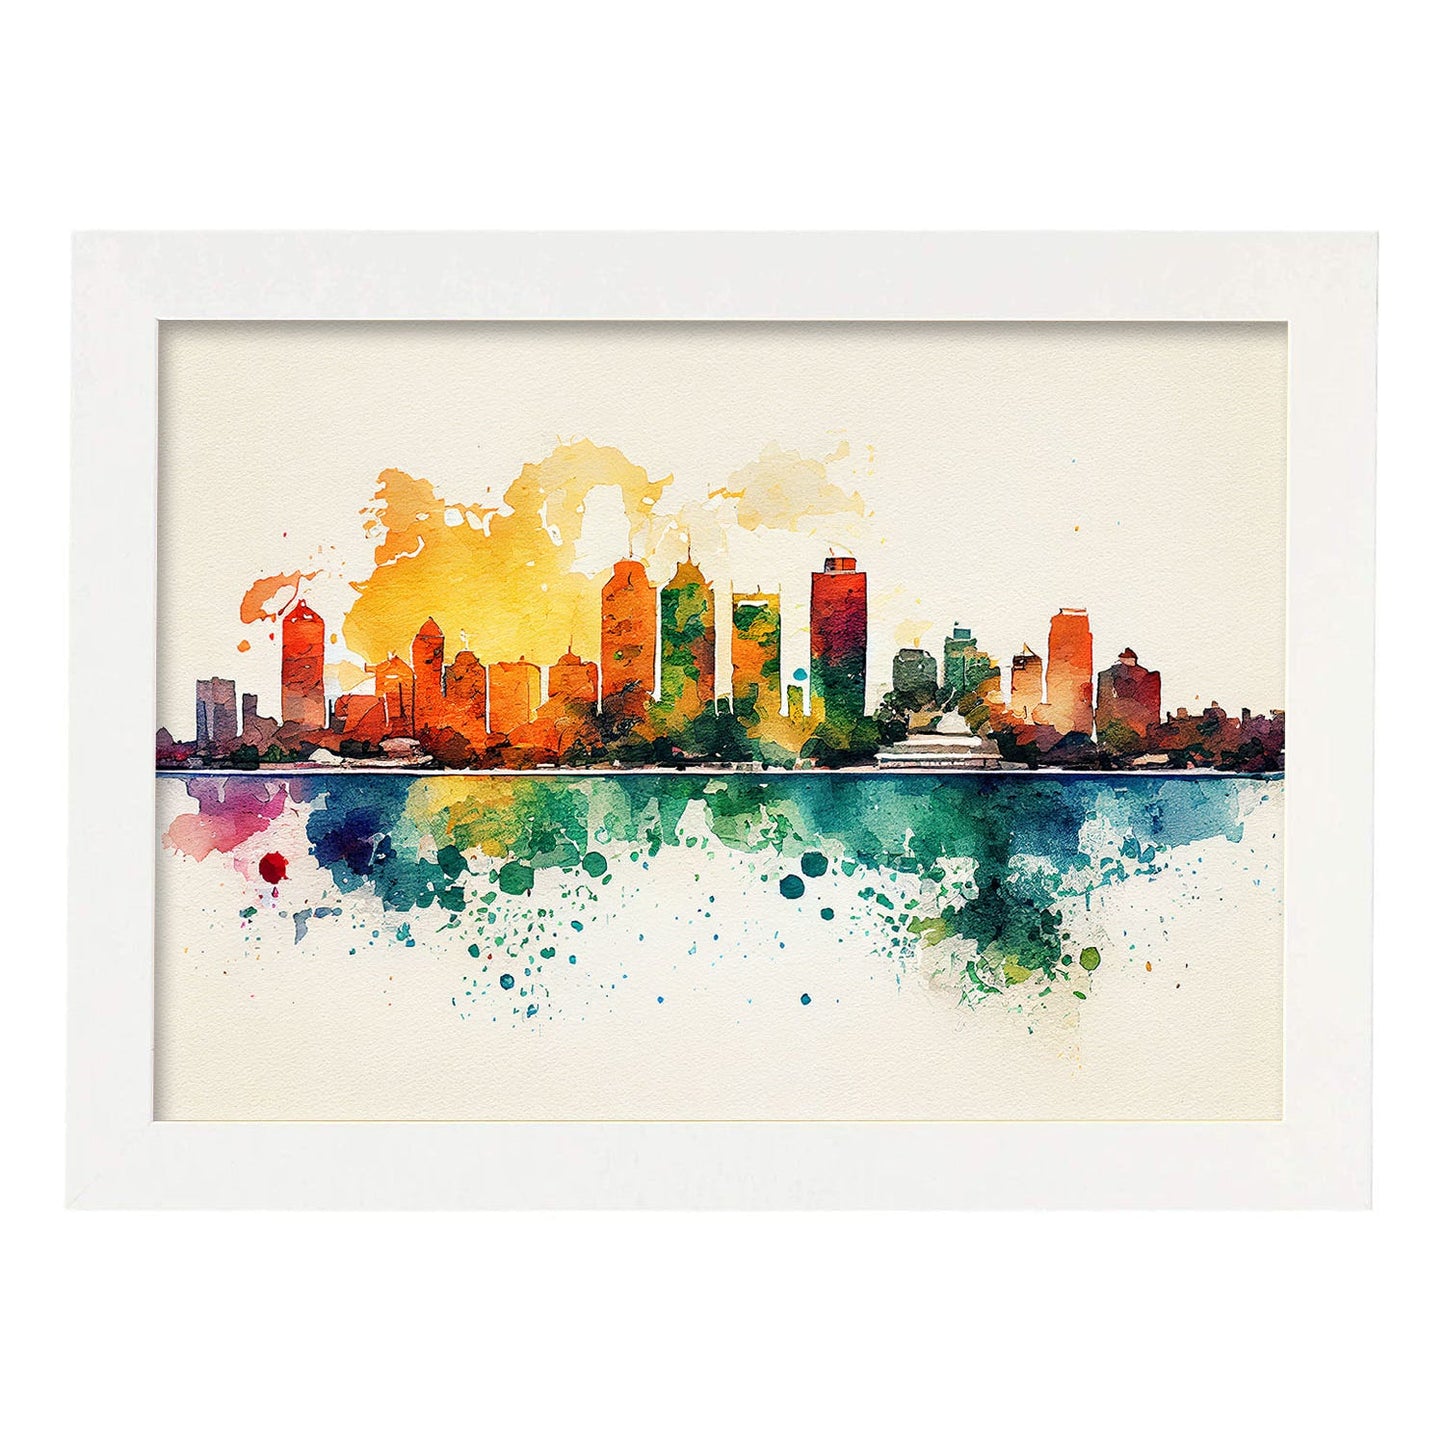 Nacnic watercolor of a skyline of the city of Cancun_2. Aesthetic Wall Art Prints for Bedroom or Living Room Design.-Artwork-Nacnic-A4-Marco Blanco-Nacnic Estudio SL